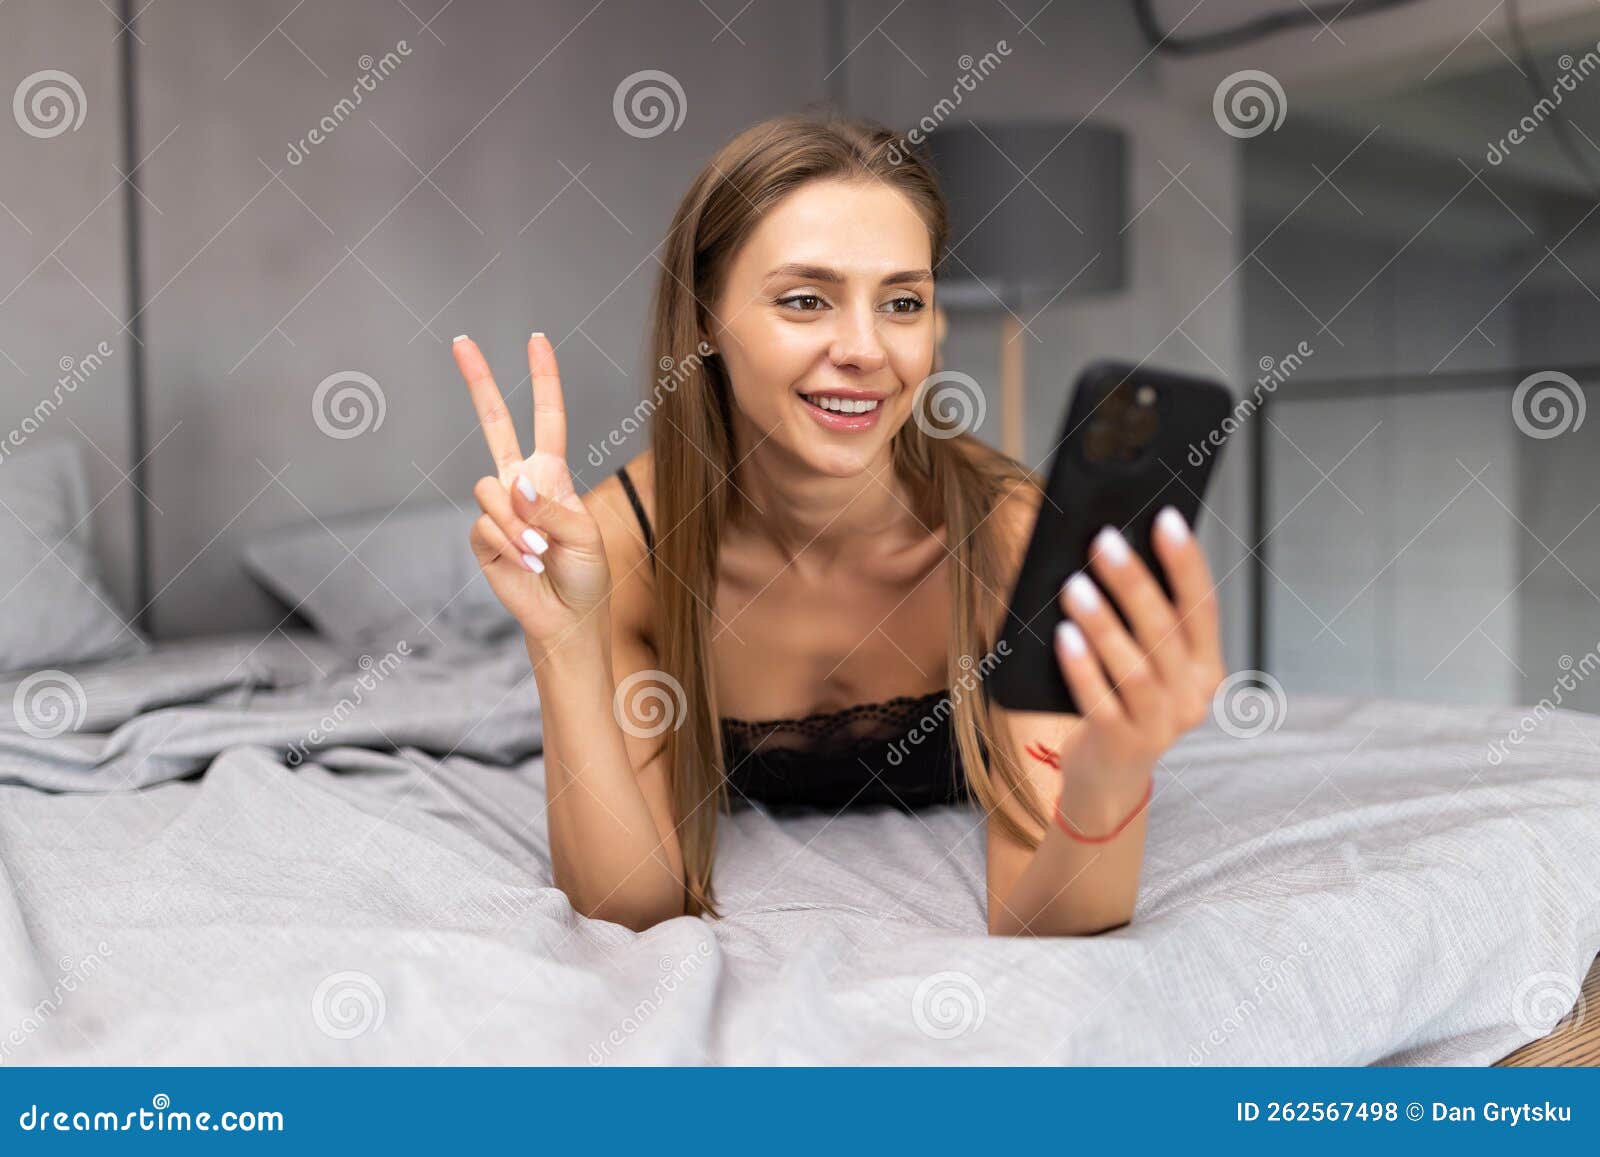 Clips App Saxy Videos - Woman in Bed Checking Social Apps with Smartphone. Woman Making Video Call,  Lying on Bed in the Morning Stock Photo - Image of lady, chat: 262567498